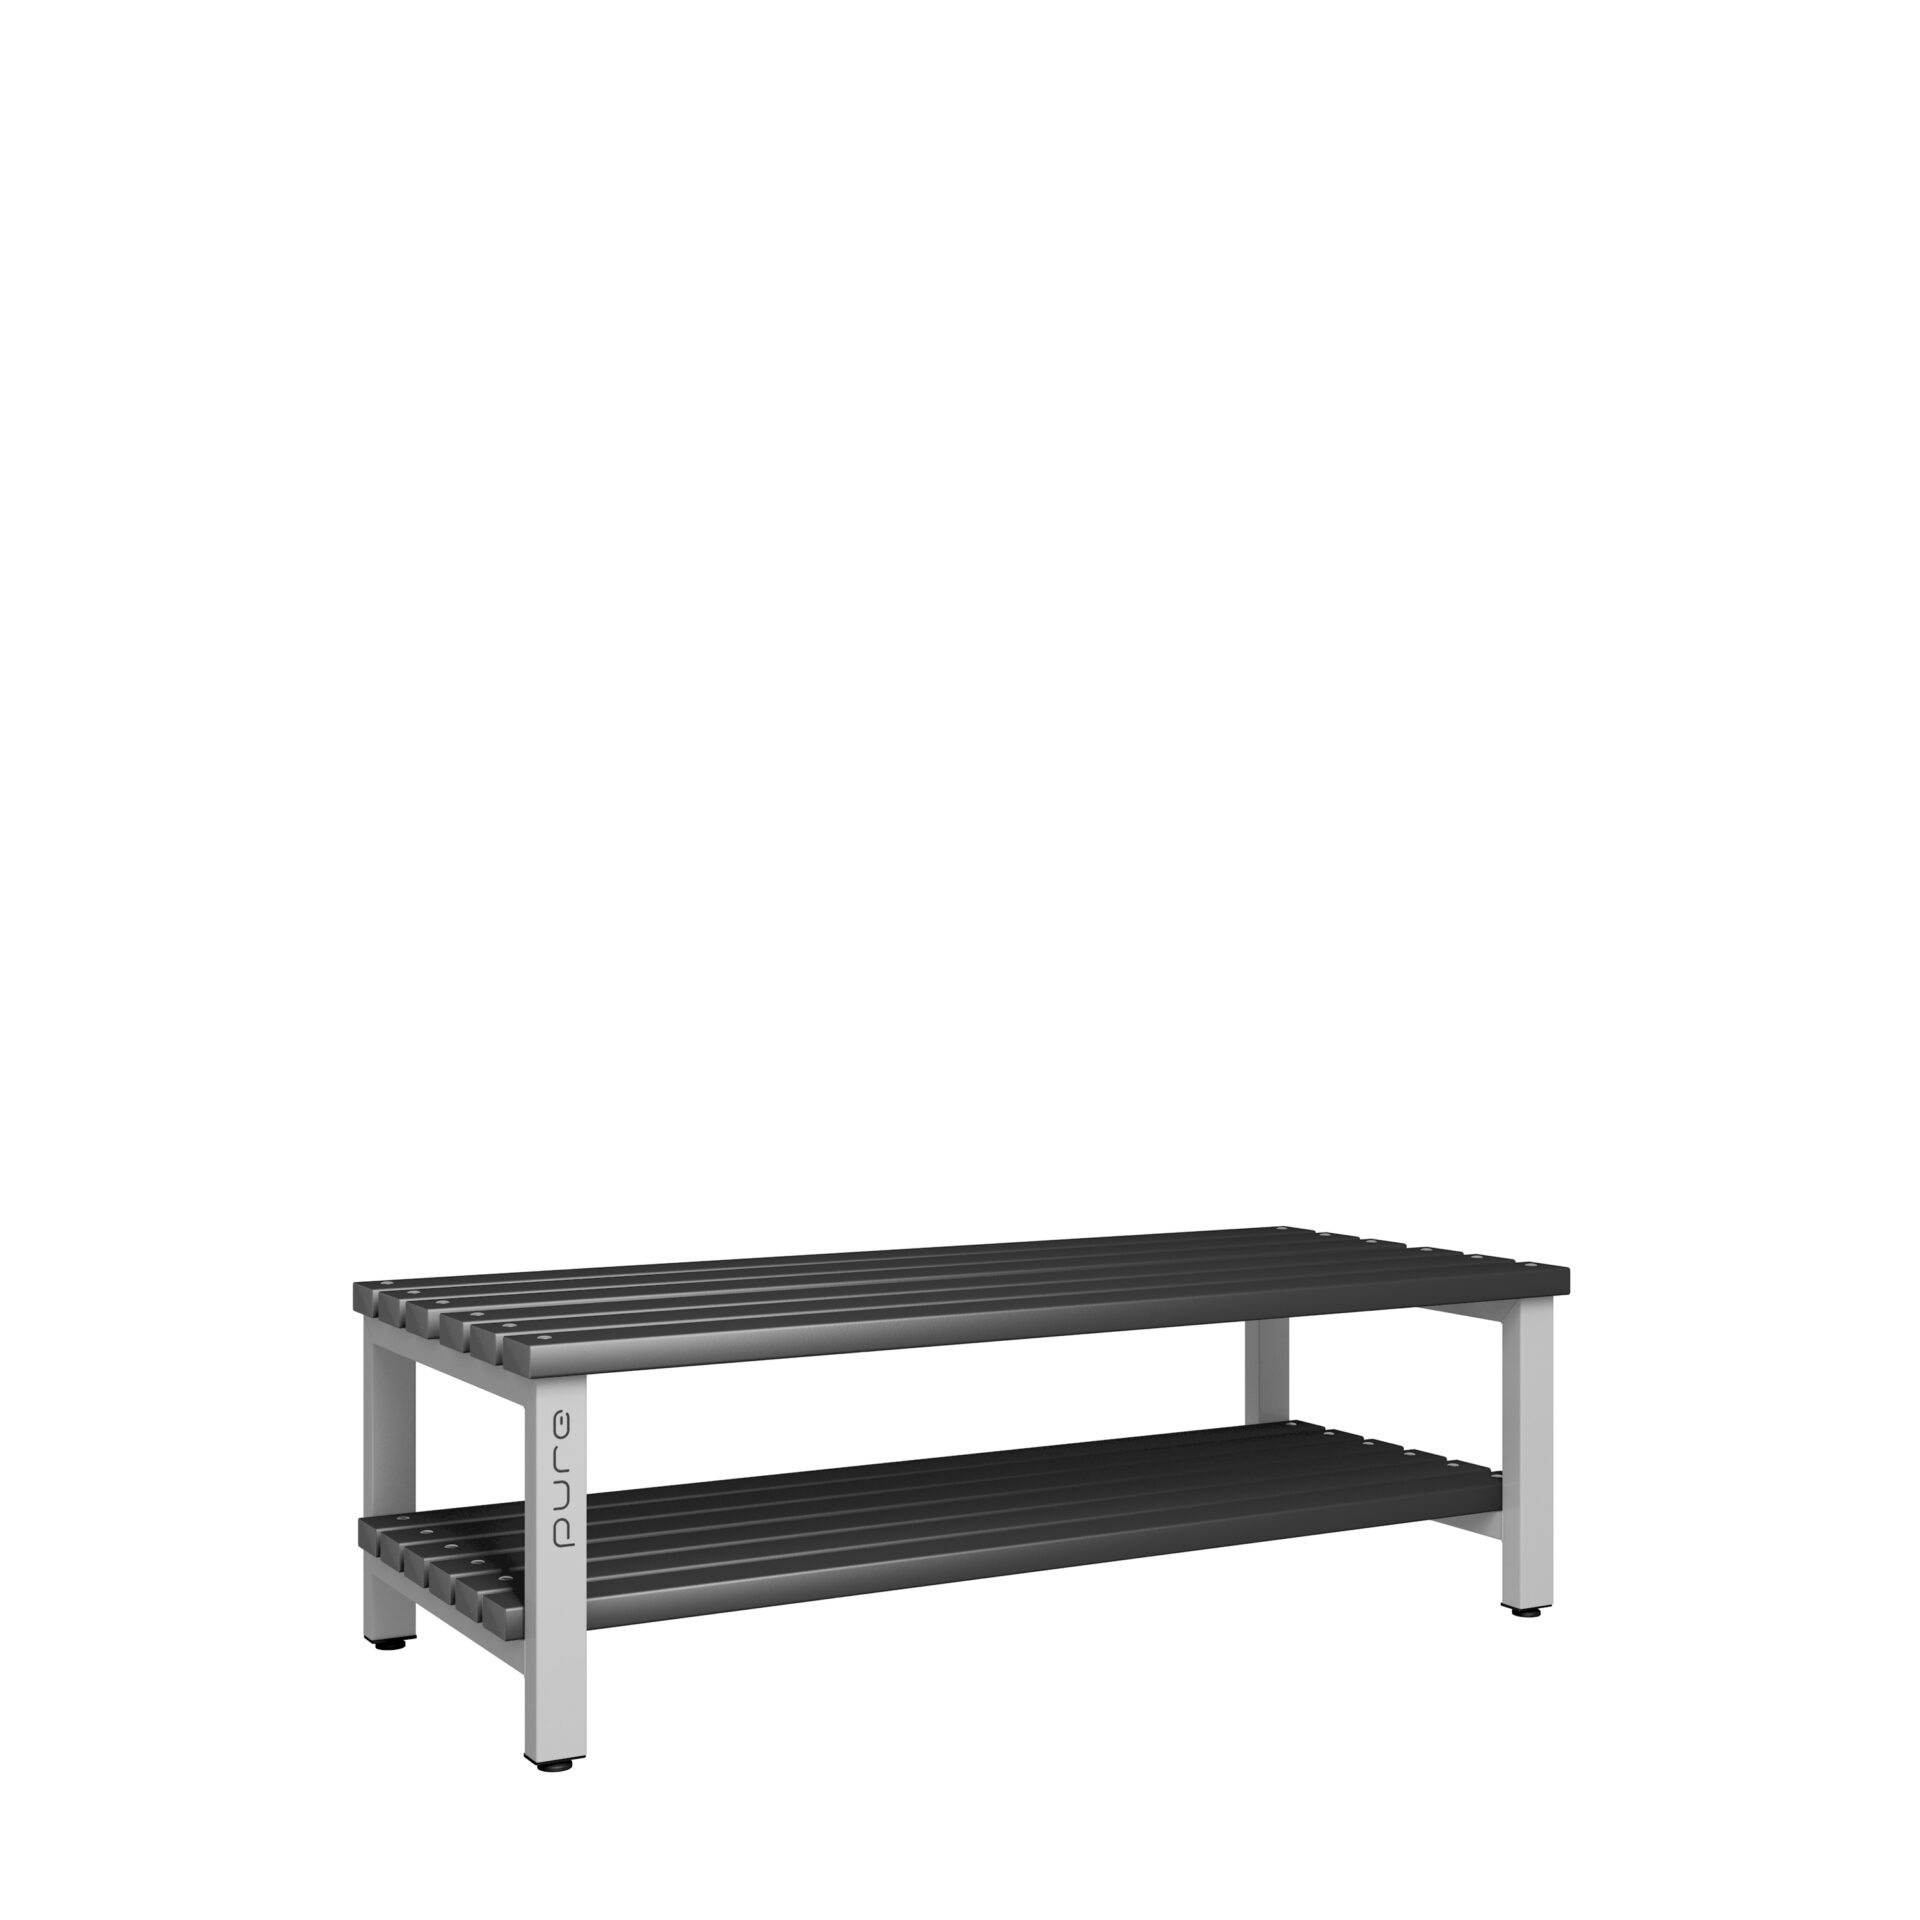 Pure Carbon Zero Double Sided 1500mm Standard Bench With Shoe Shelf - Pearl Silver / Black Polymer